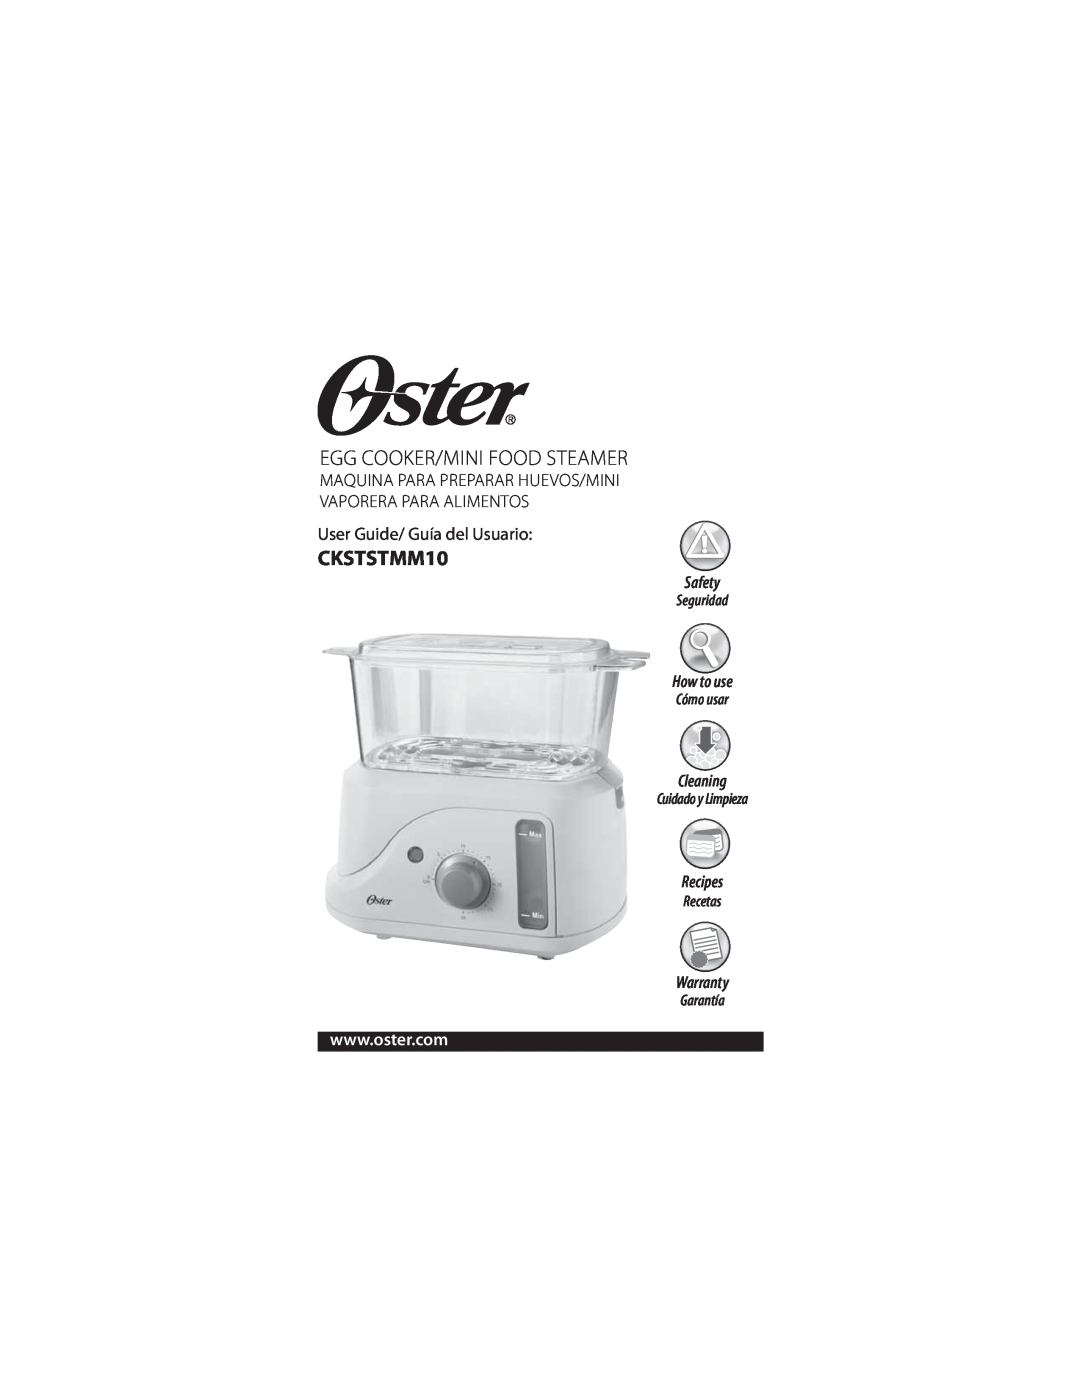 Oster CKSTSTMM10 warranty Egg Cooker/Mini Food Steamer, Safety, How to use, Cleaning, Recipes, Warranty, Seguridad 